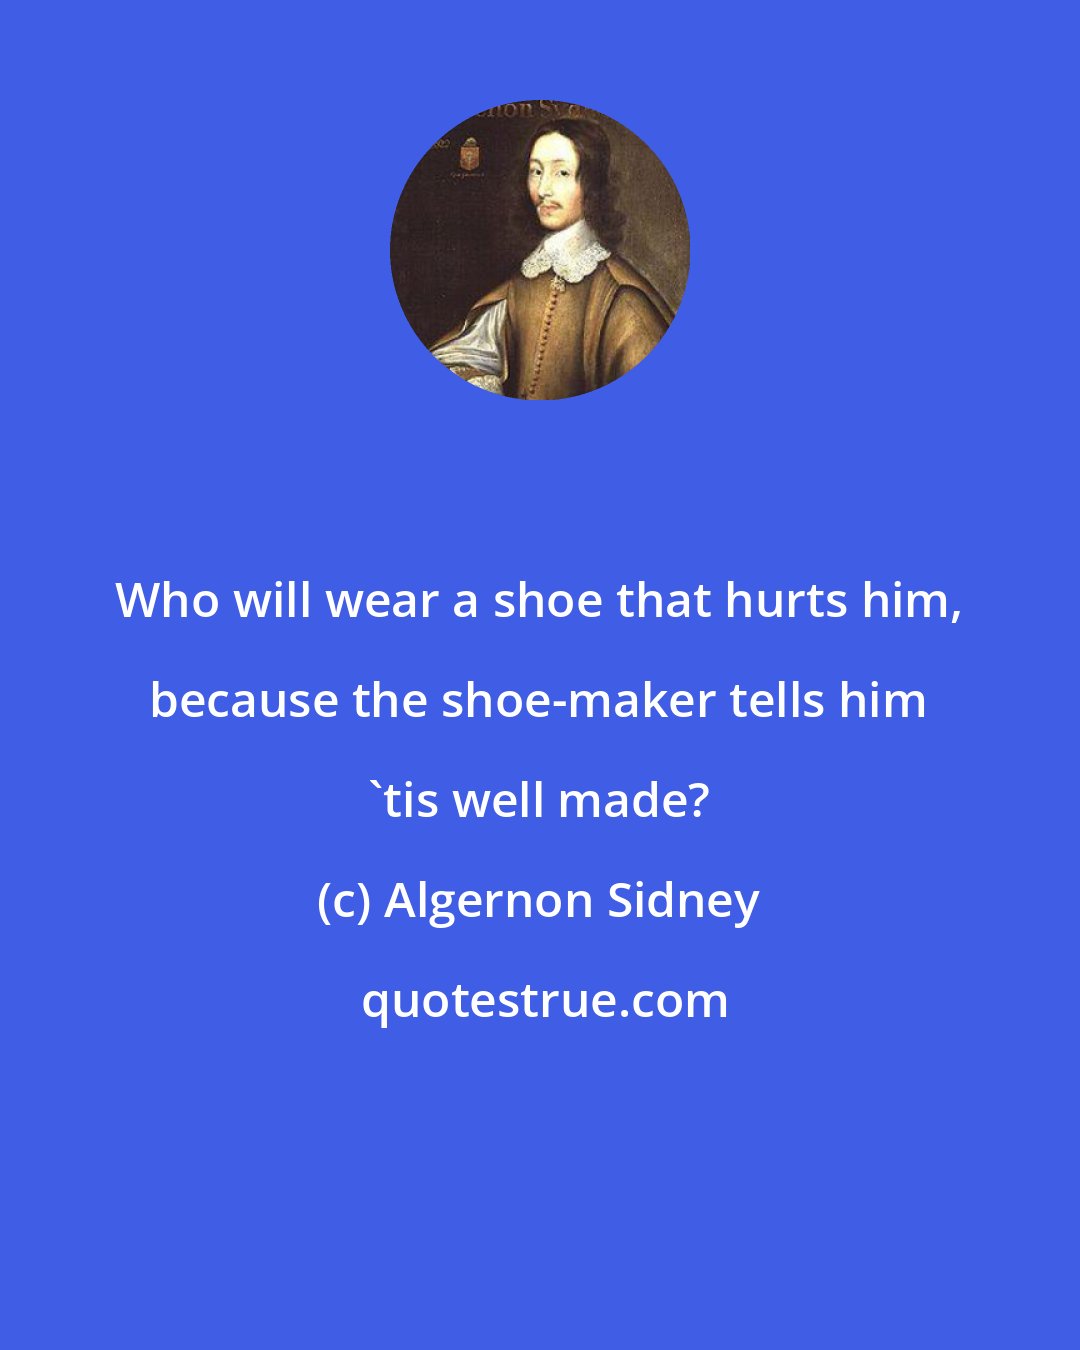 Algernon Sidney: Who will wear a shoe that hurts him, because the shoe-maker tells him 'tis well made?